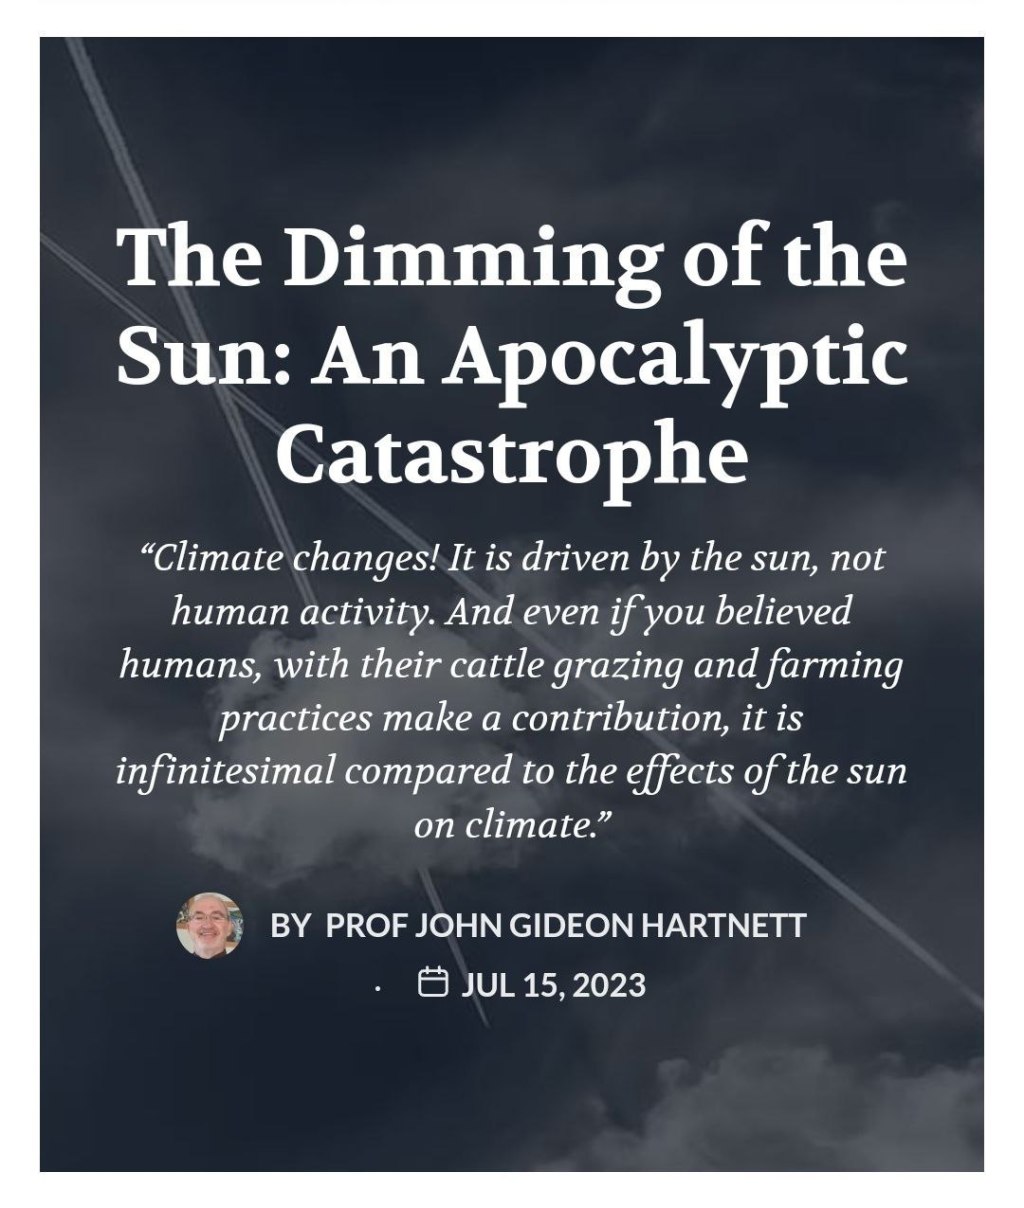 The Dimming of the Sun — An Apocalyptic Catastrophe